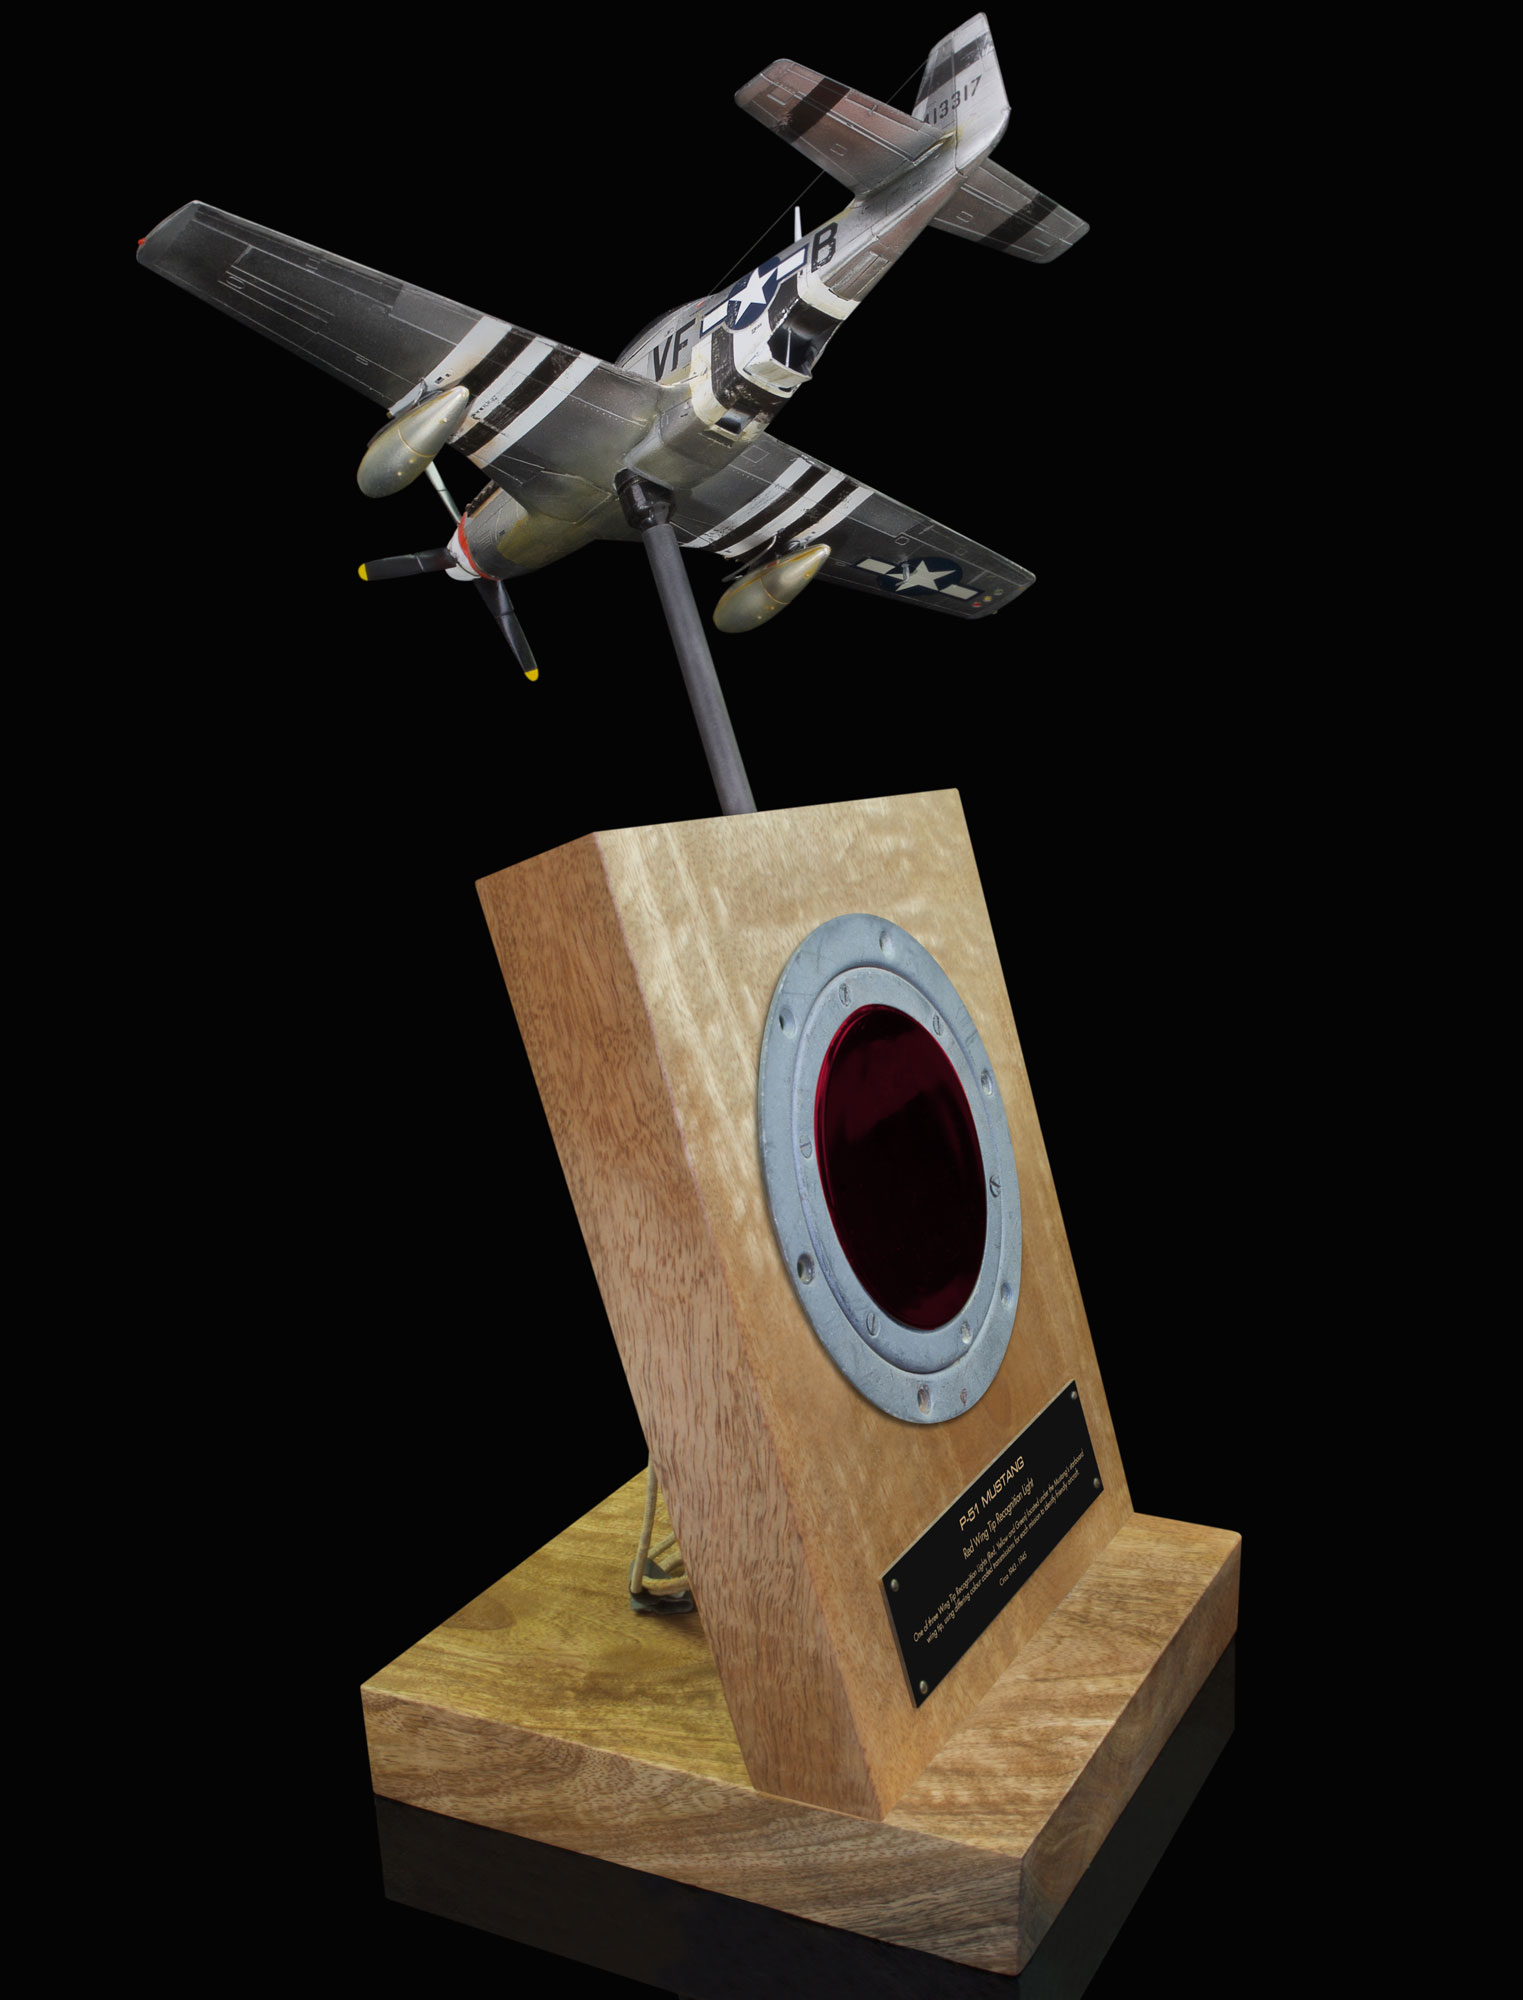 P-51 MUSTANG, WWII RED WINGTIP RECOGNITION LIGHT